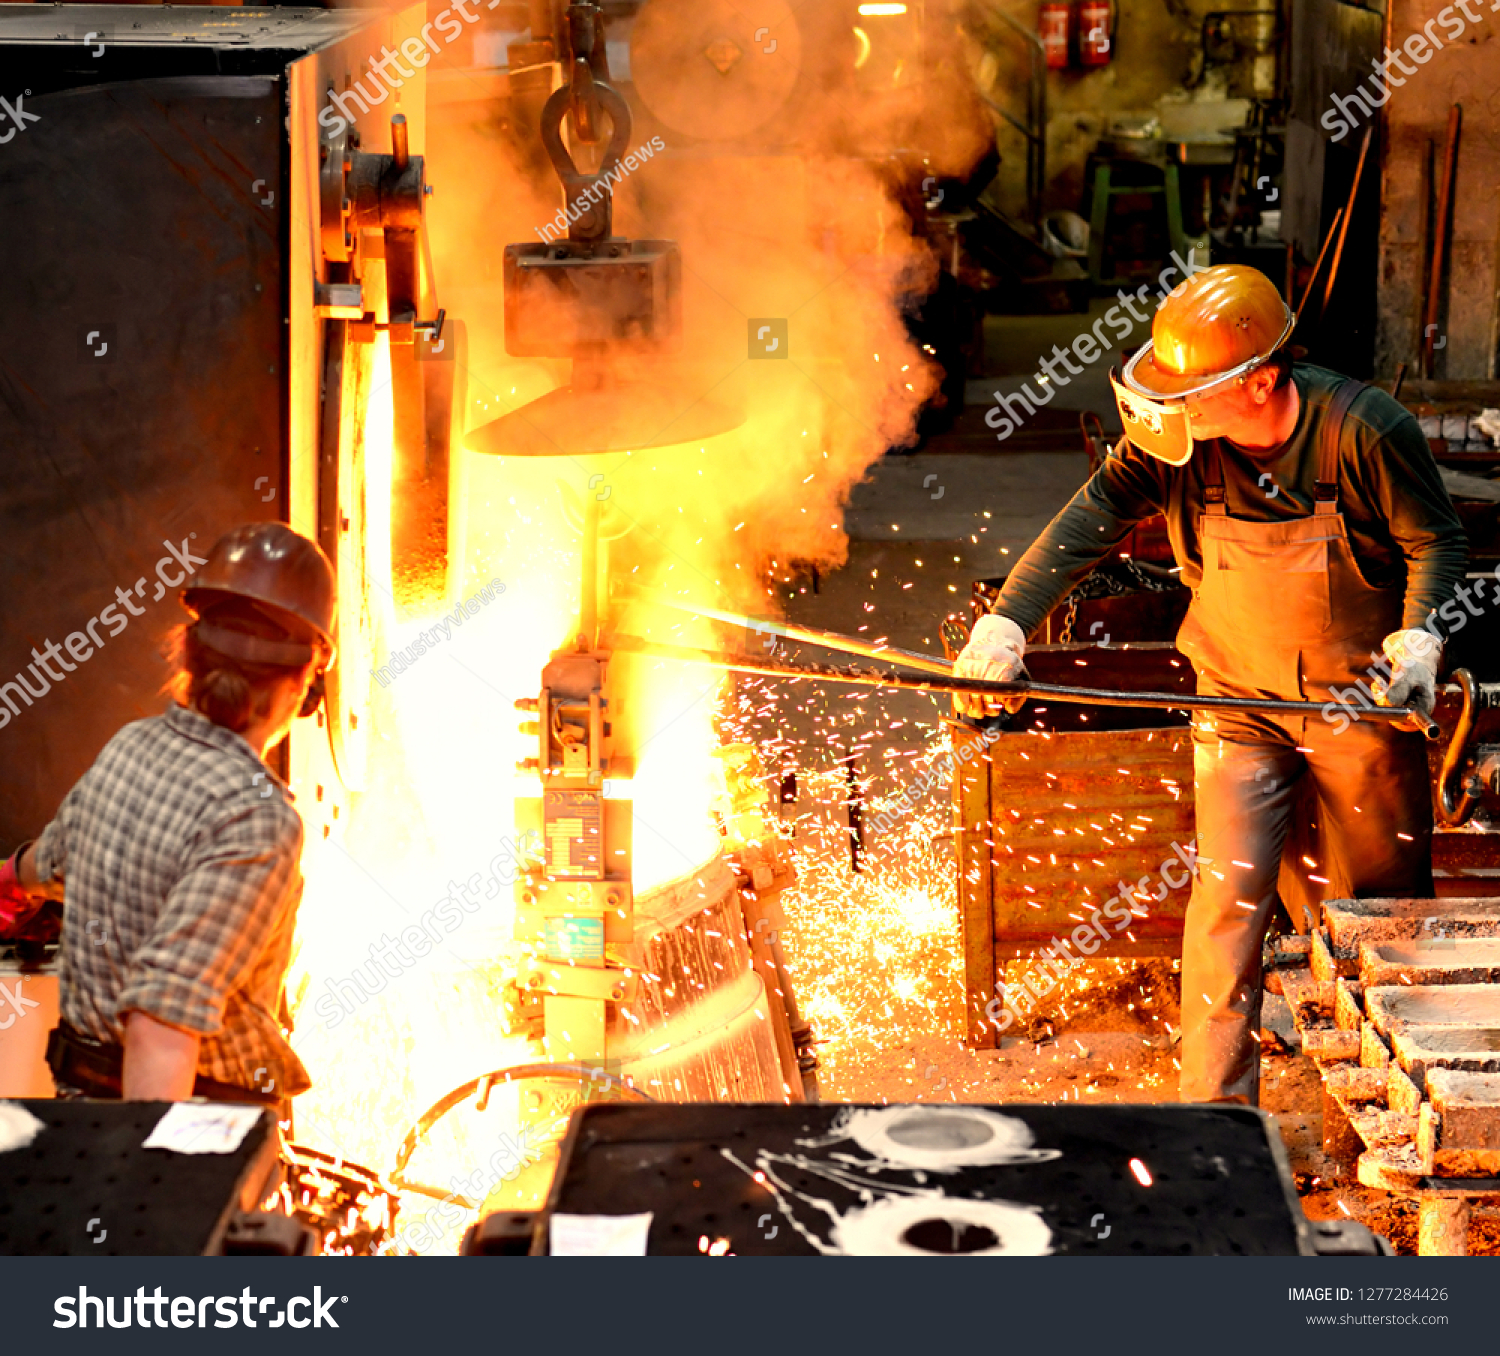 workers in a foundry casting a metal workpiece - safety at work and teamwork  #1277284426